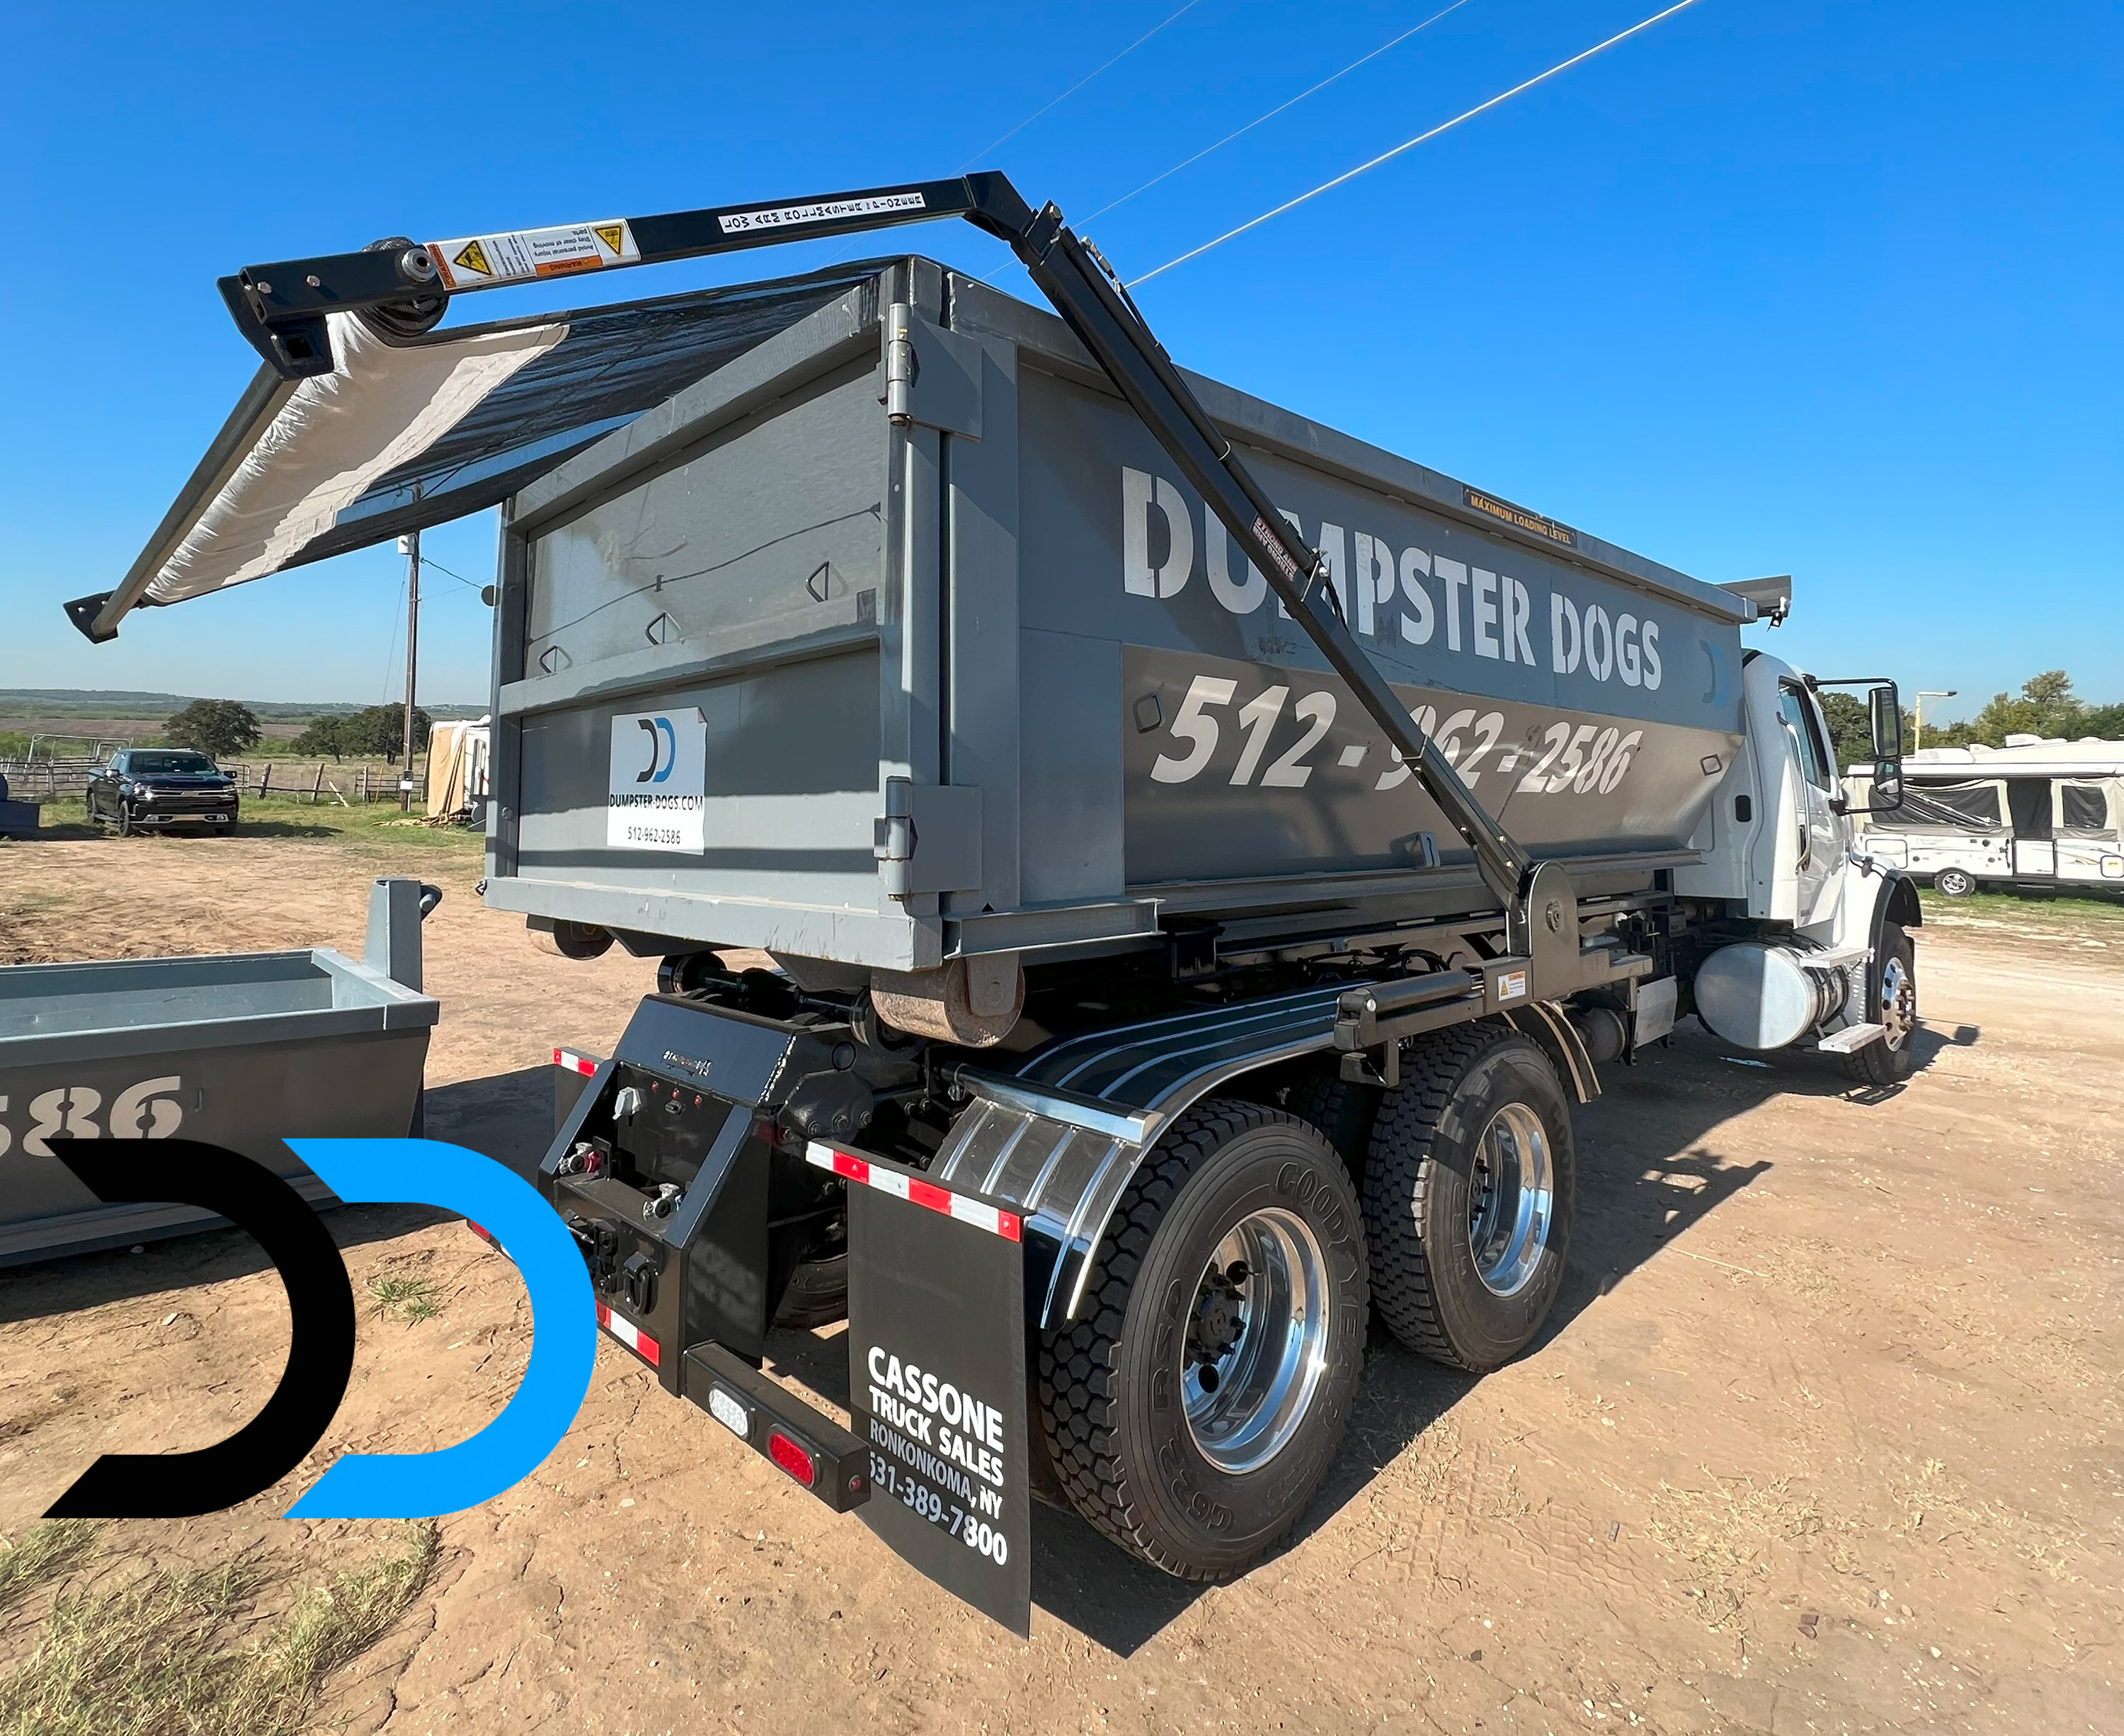 Construction Dumpster Service Dripping Springs TX Contractors Rely On